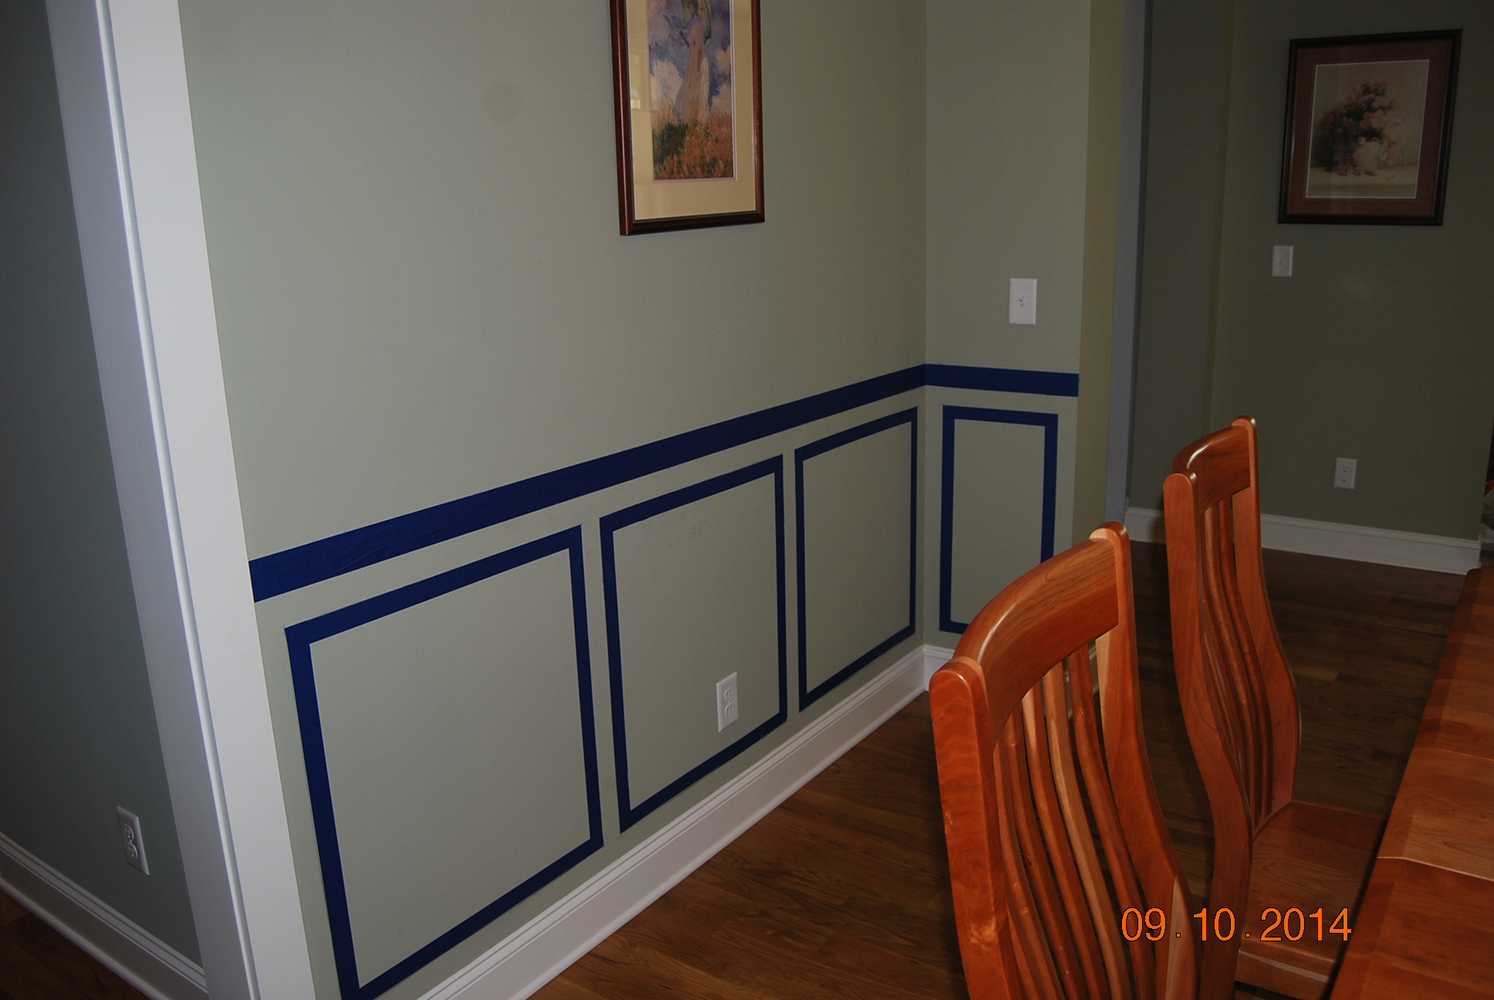 BOND CHAIR RAIL & PANEL MOULDINGS: from Gary J. Palmirotto, Inc.